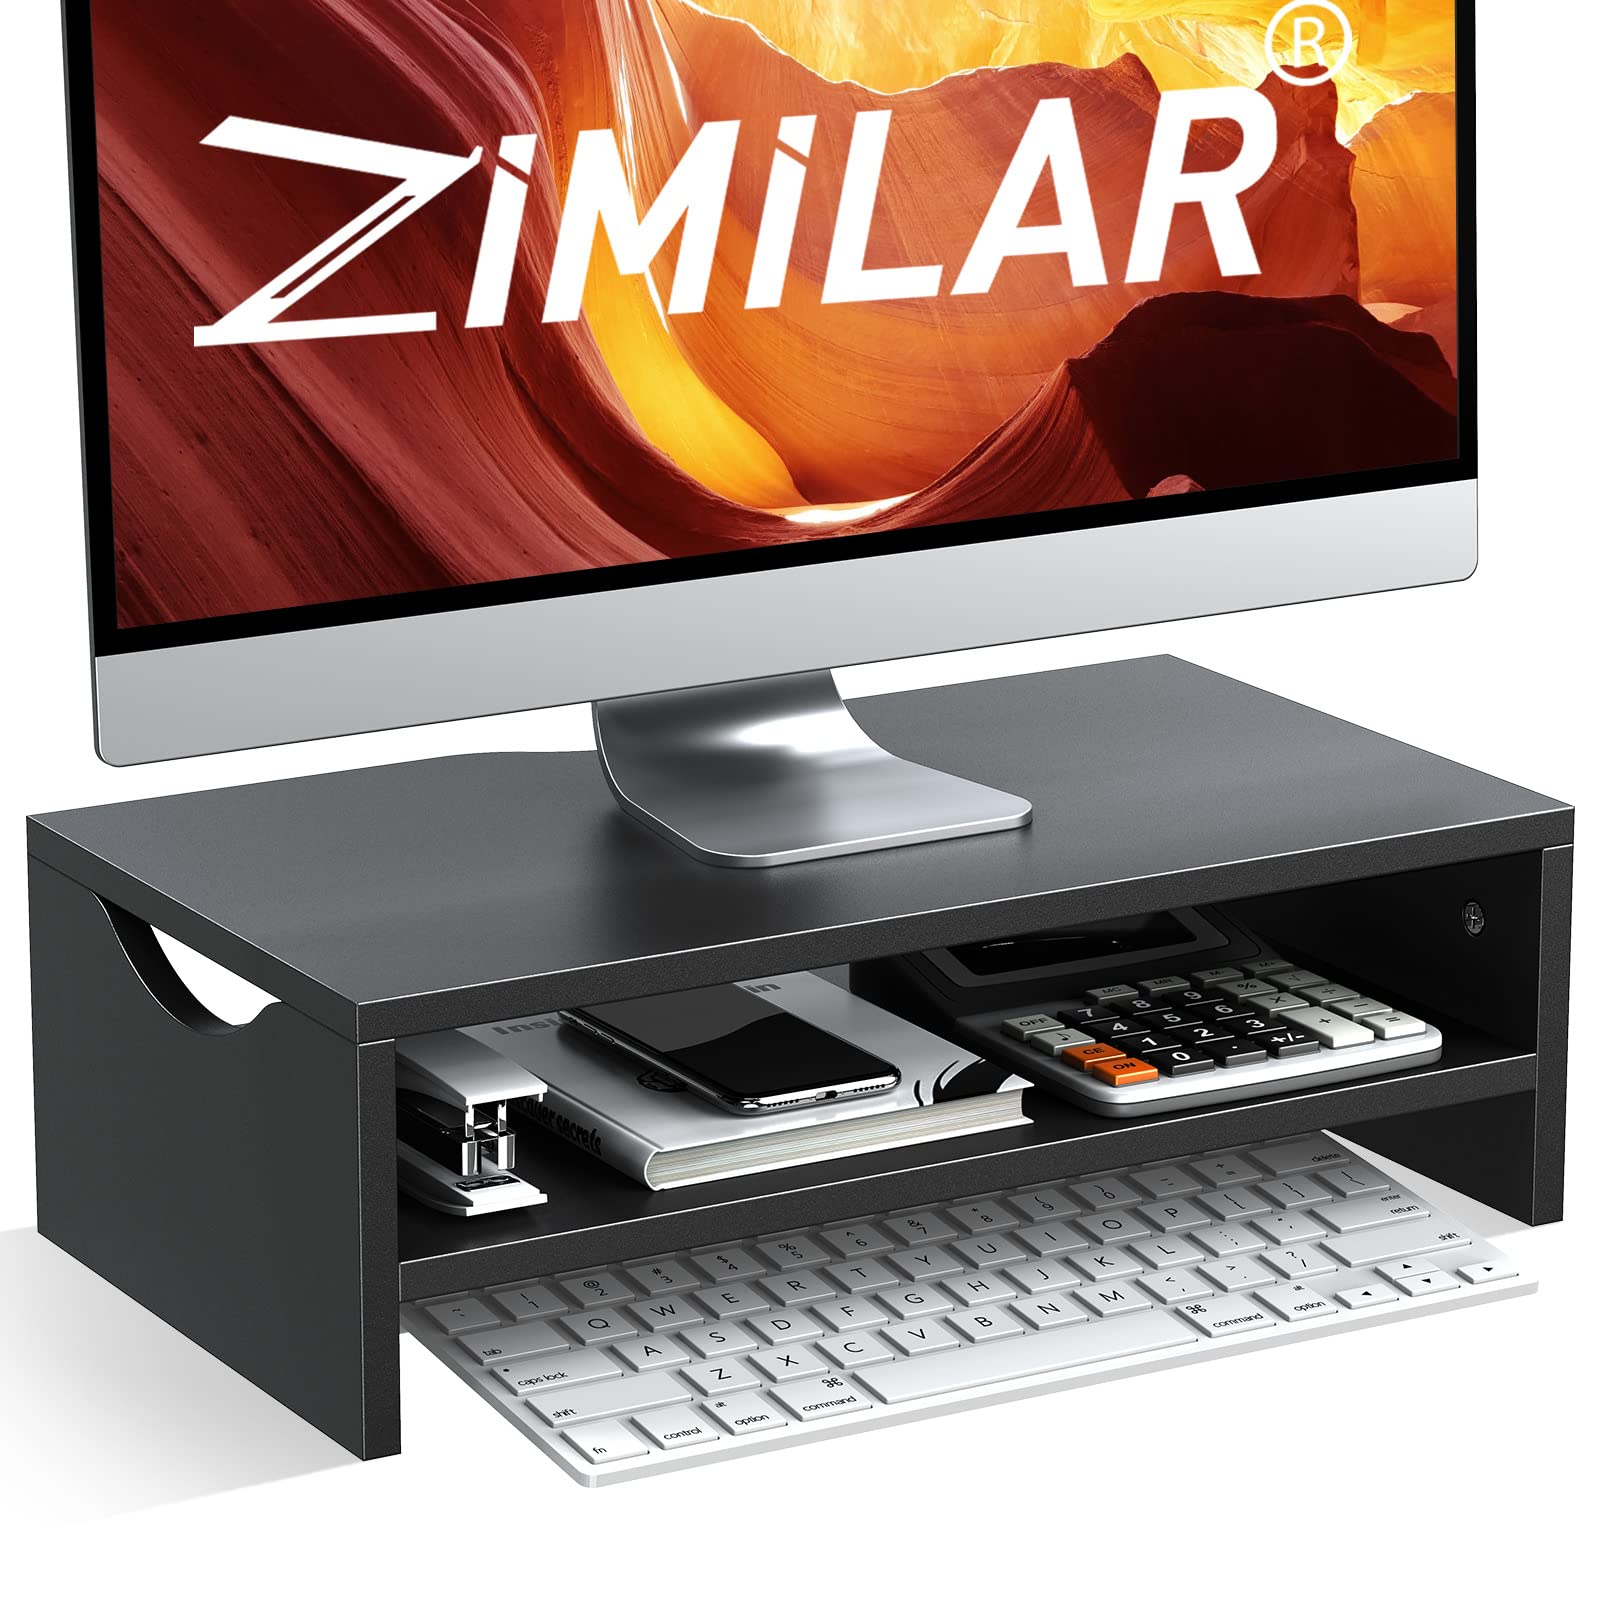 Zimilar Monitor Stand Riser, 2 Tiers Laptop Computer Monitor Riser for PC Screen, iMac, Desktop Wooden Screen Monitor Stand Riser with Storage Organizer for Home Office